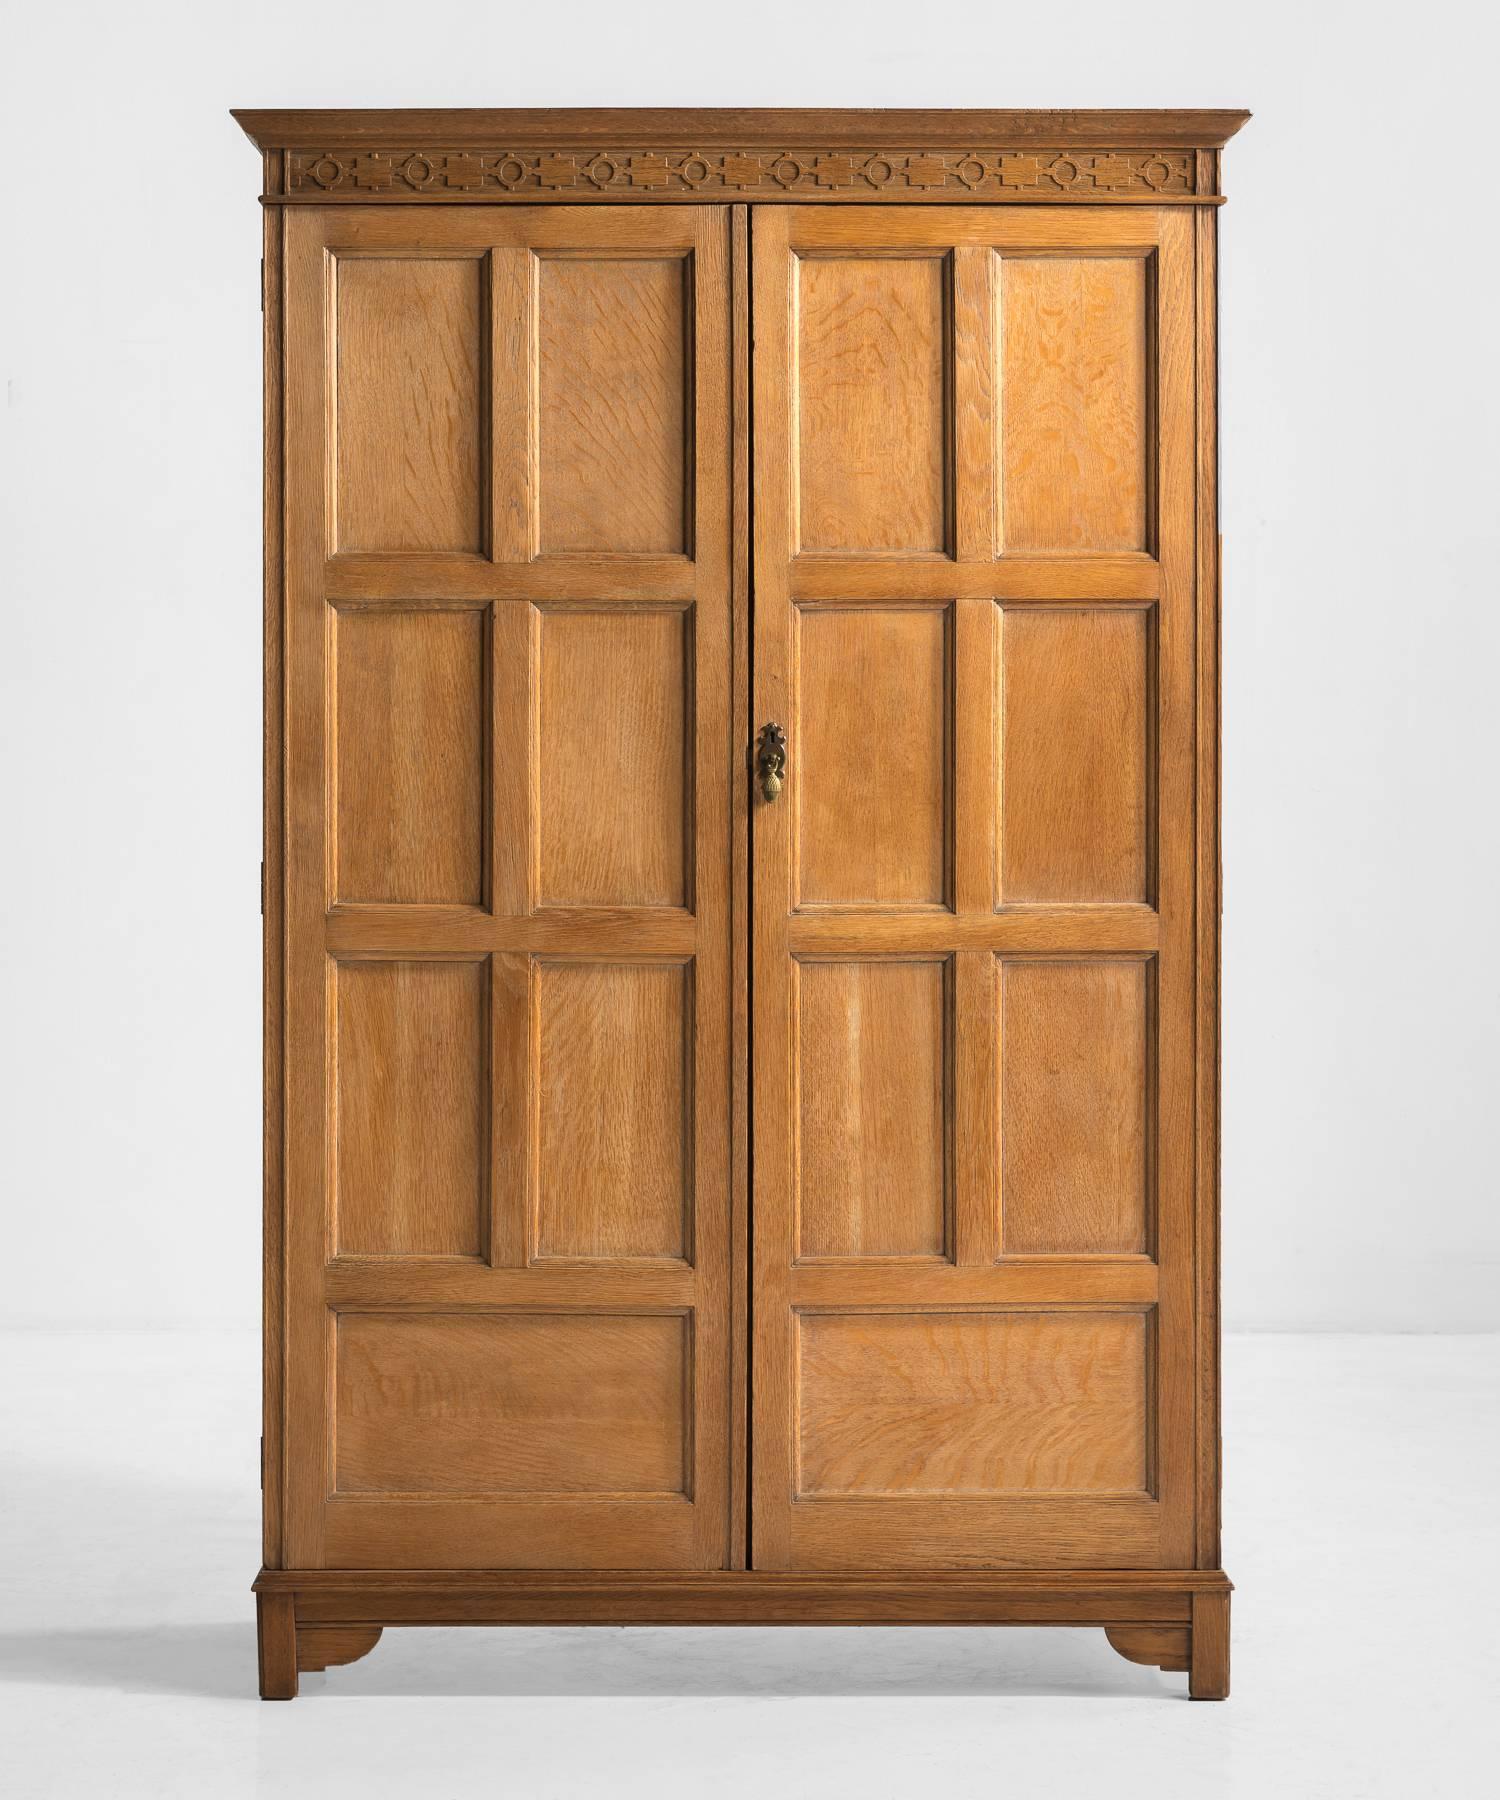 Solid oak double wardrobe with panelled doors. Inside is a large hanging space with central brass hanging bar with hooks.